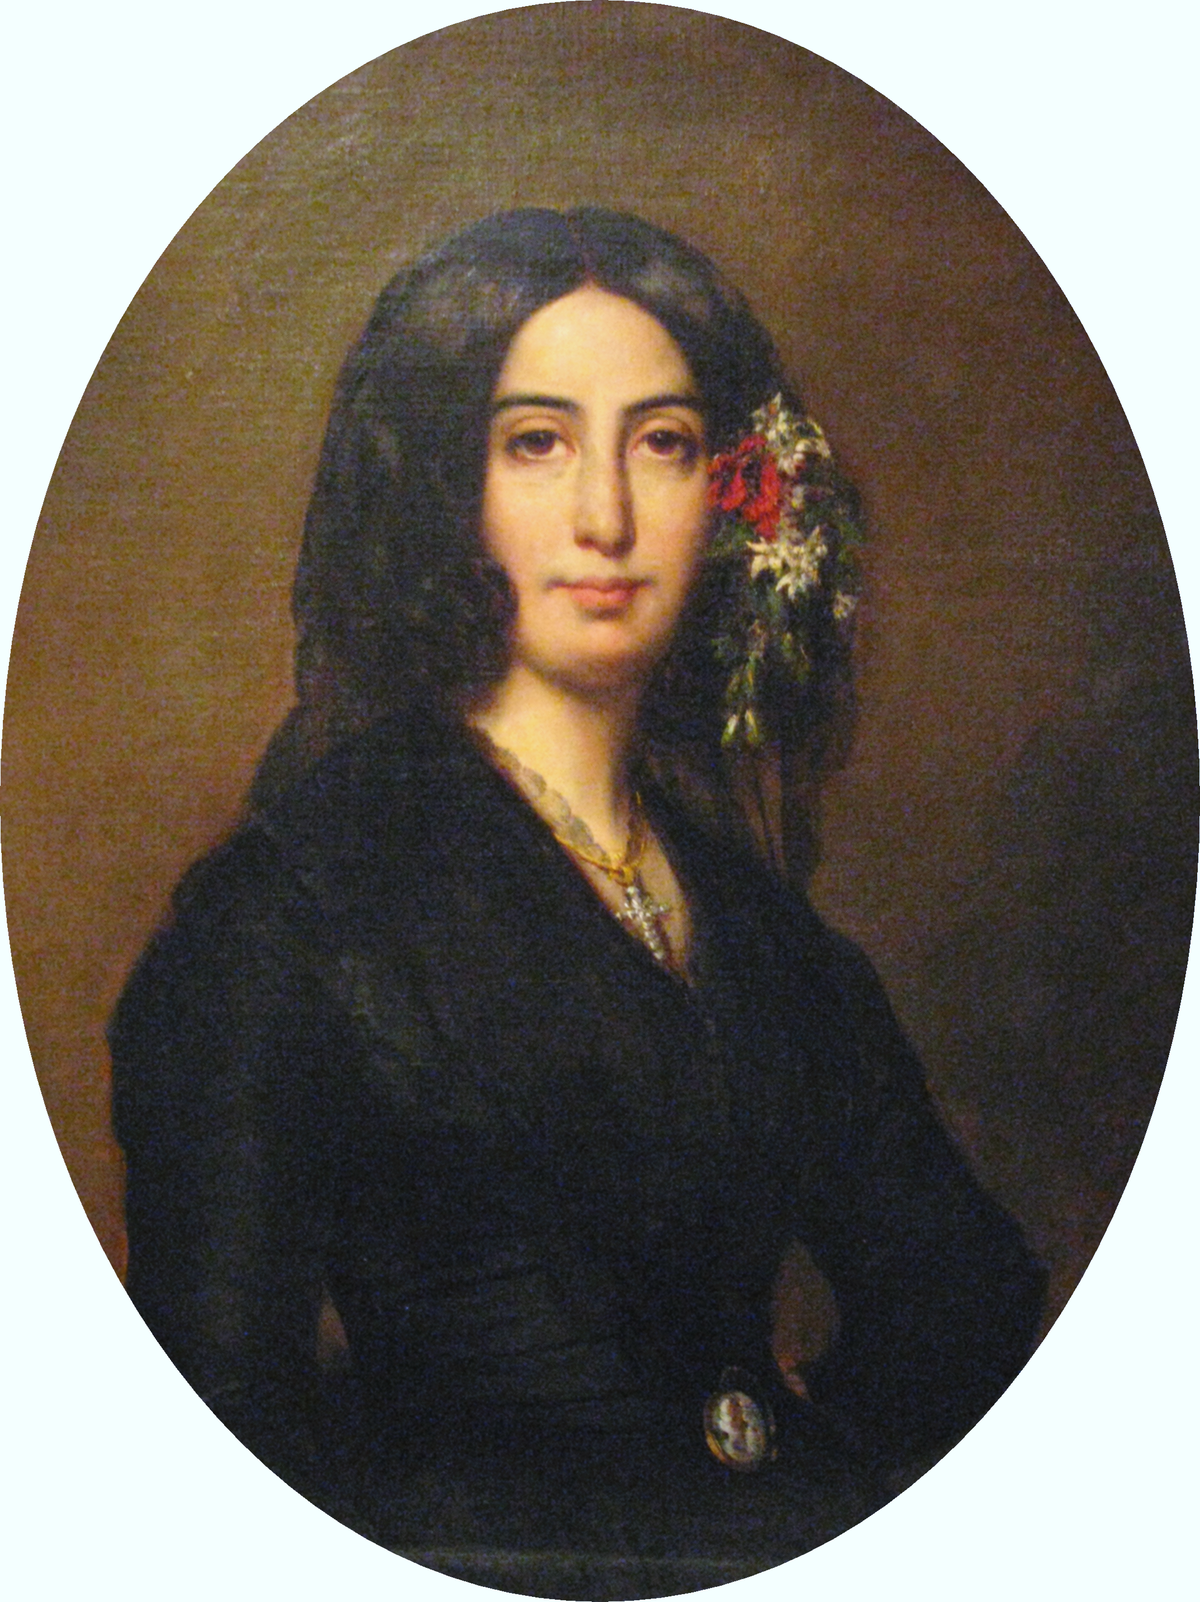 Amantine Dupin (1804-1876) used the pseudonym George Sand to publish her works and move easily in the intellectual circle of her time.